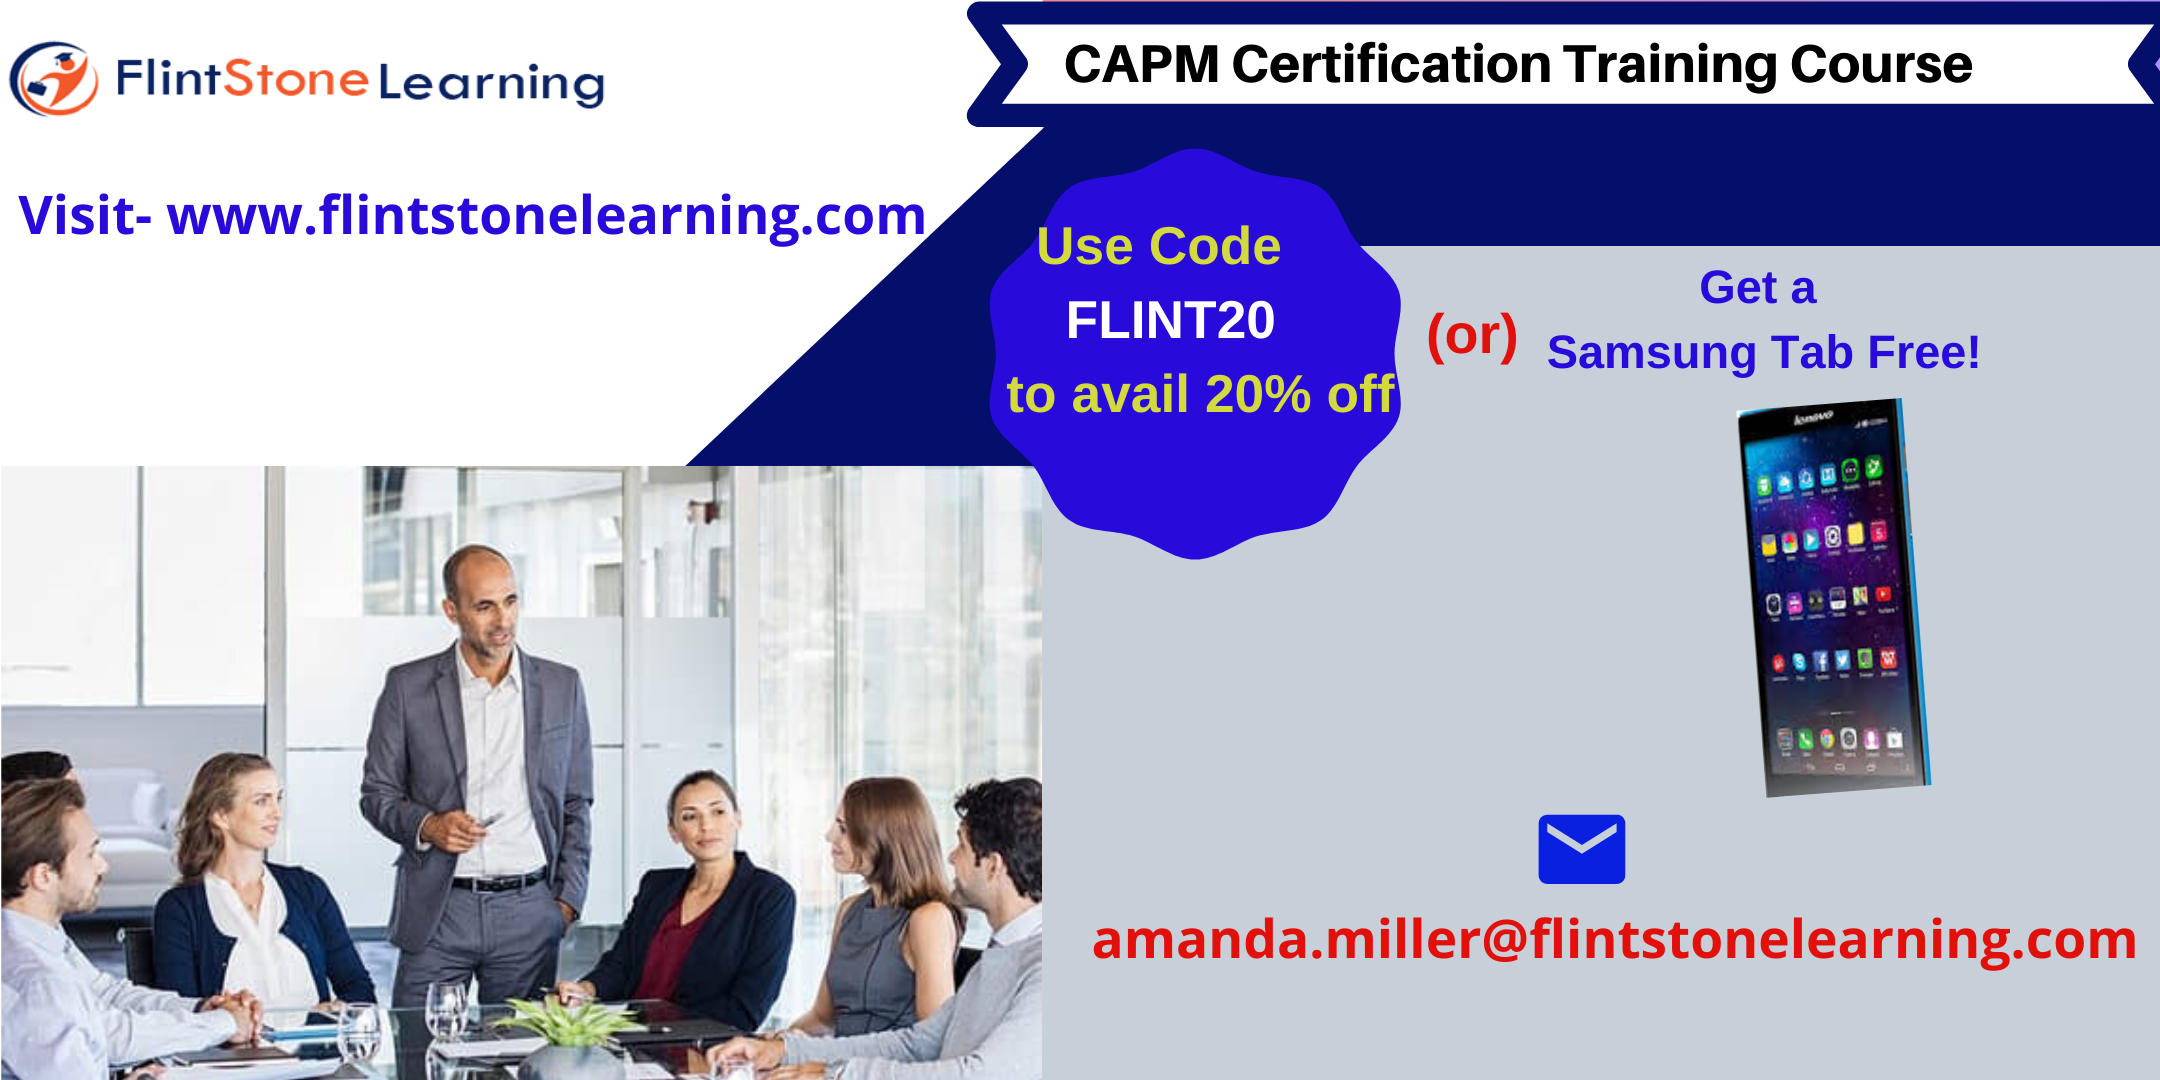 CAPM Certification Training Course in Mojave, CA